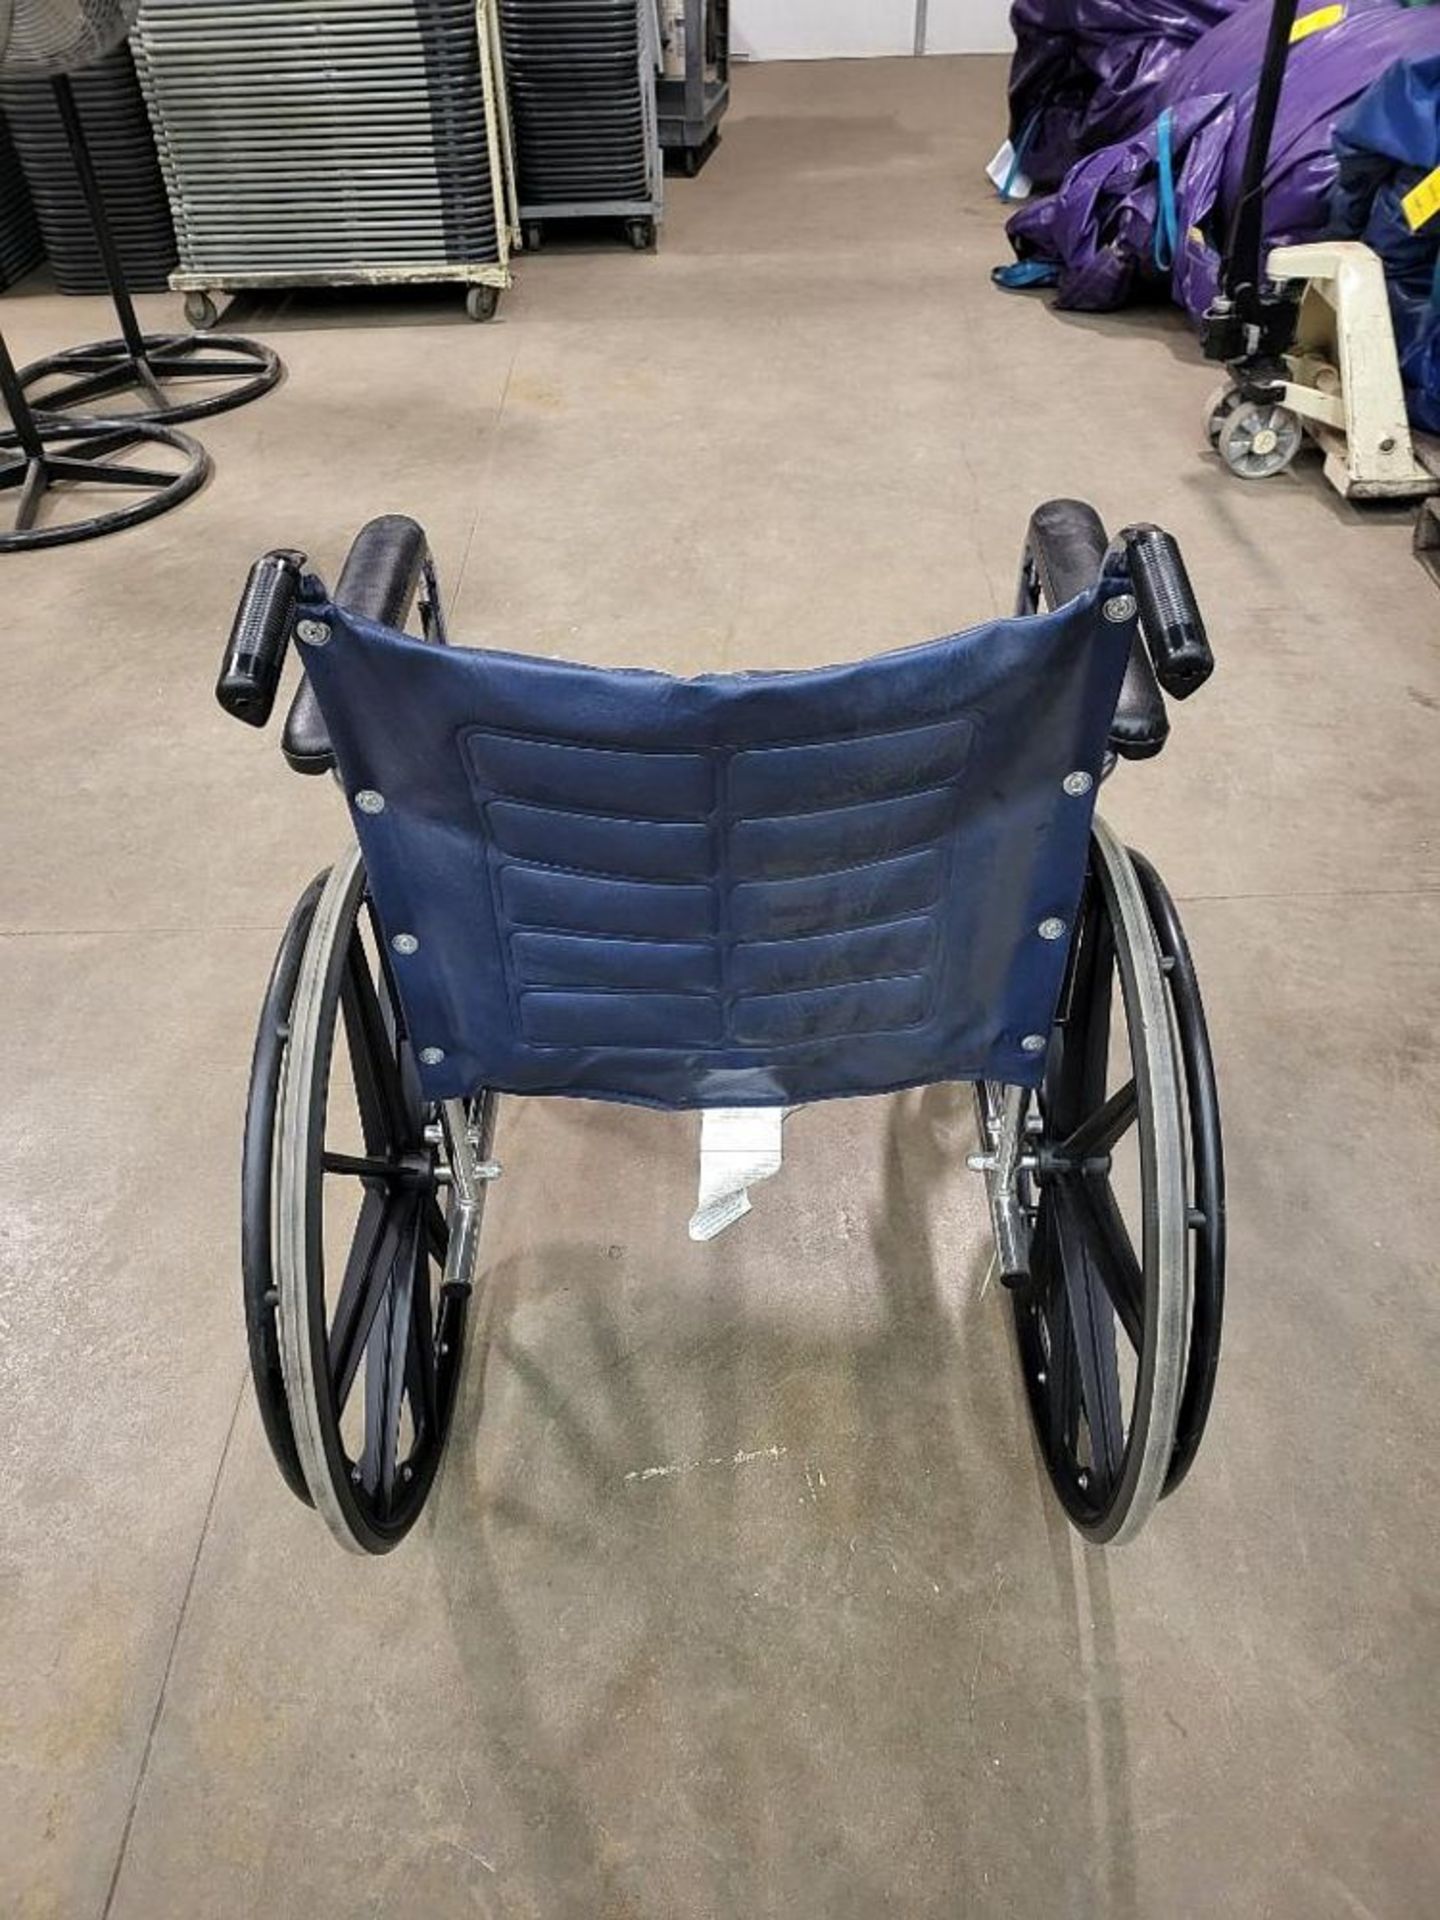 Invacare Tracer EX2 Manual Wheelchair, 250 lb. cap (LOCATION: 1766 Waukegan Rd., Glenview, IL - Image 2 of 4